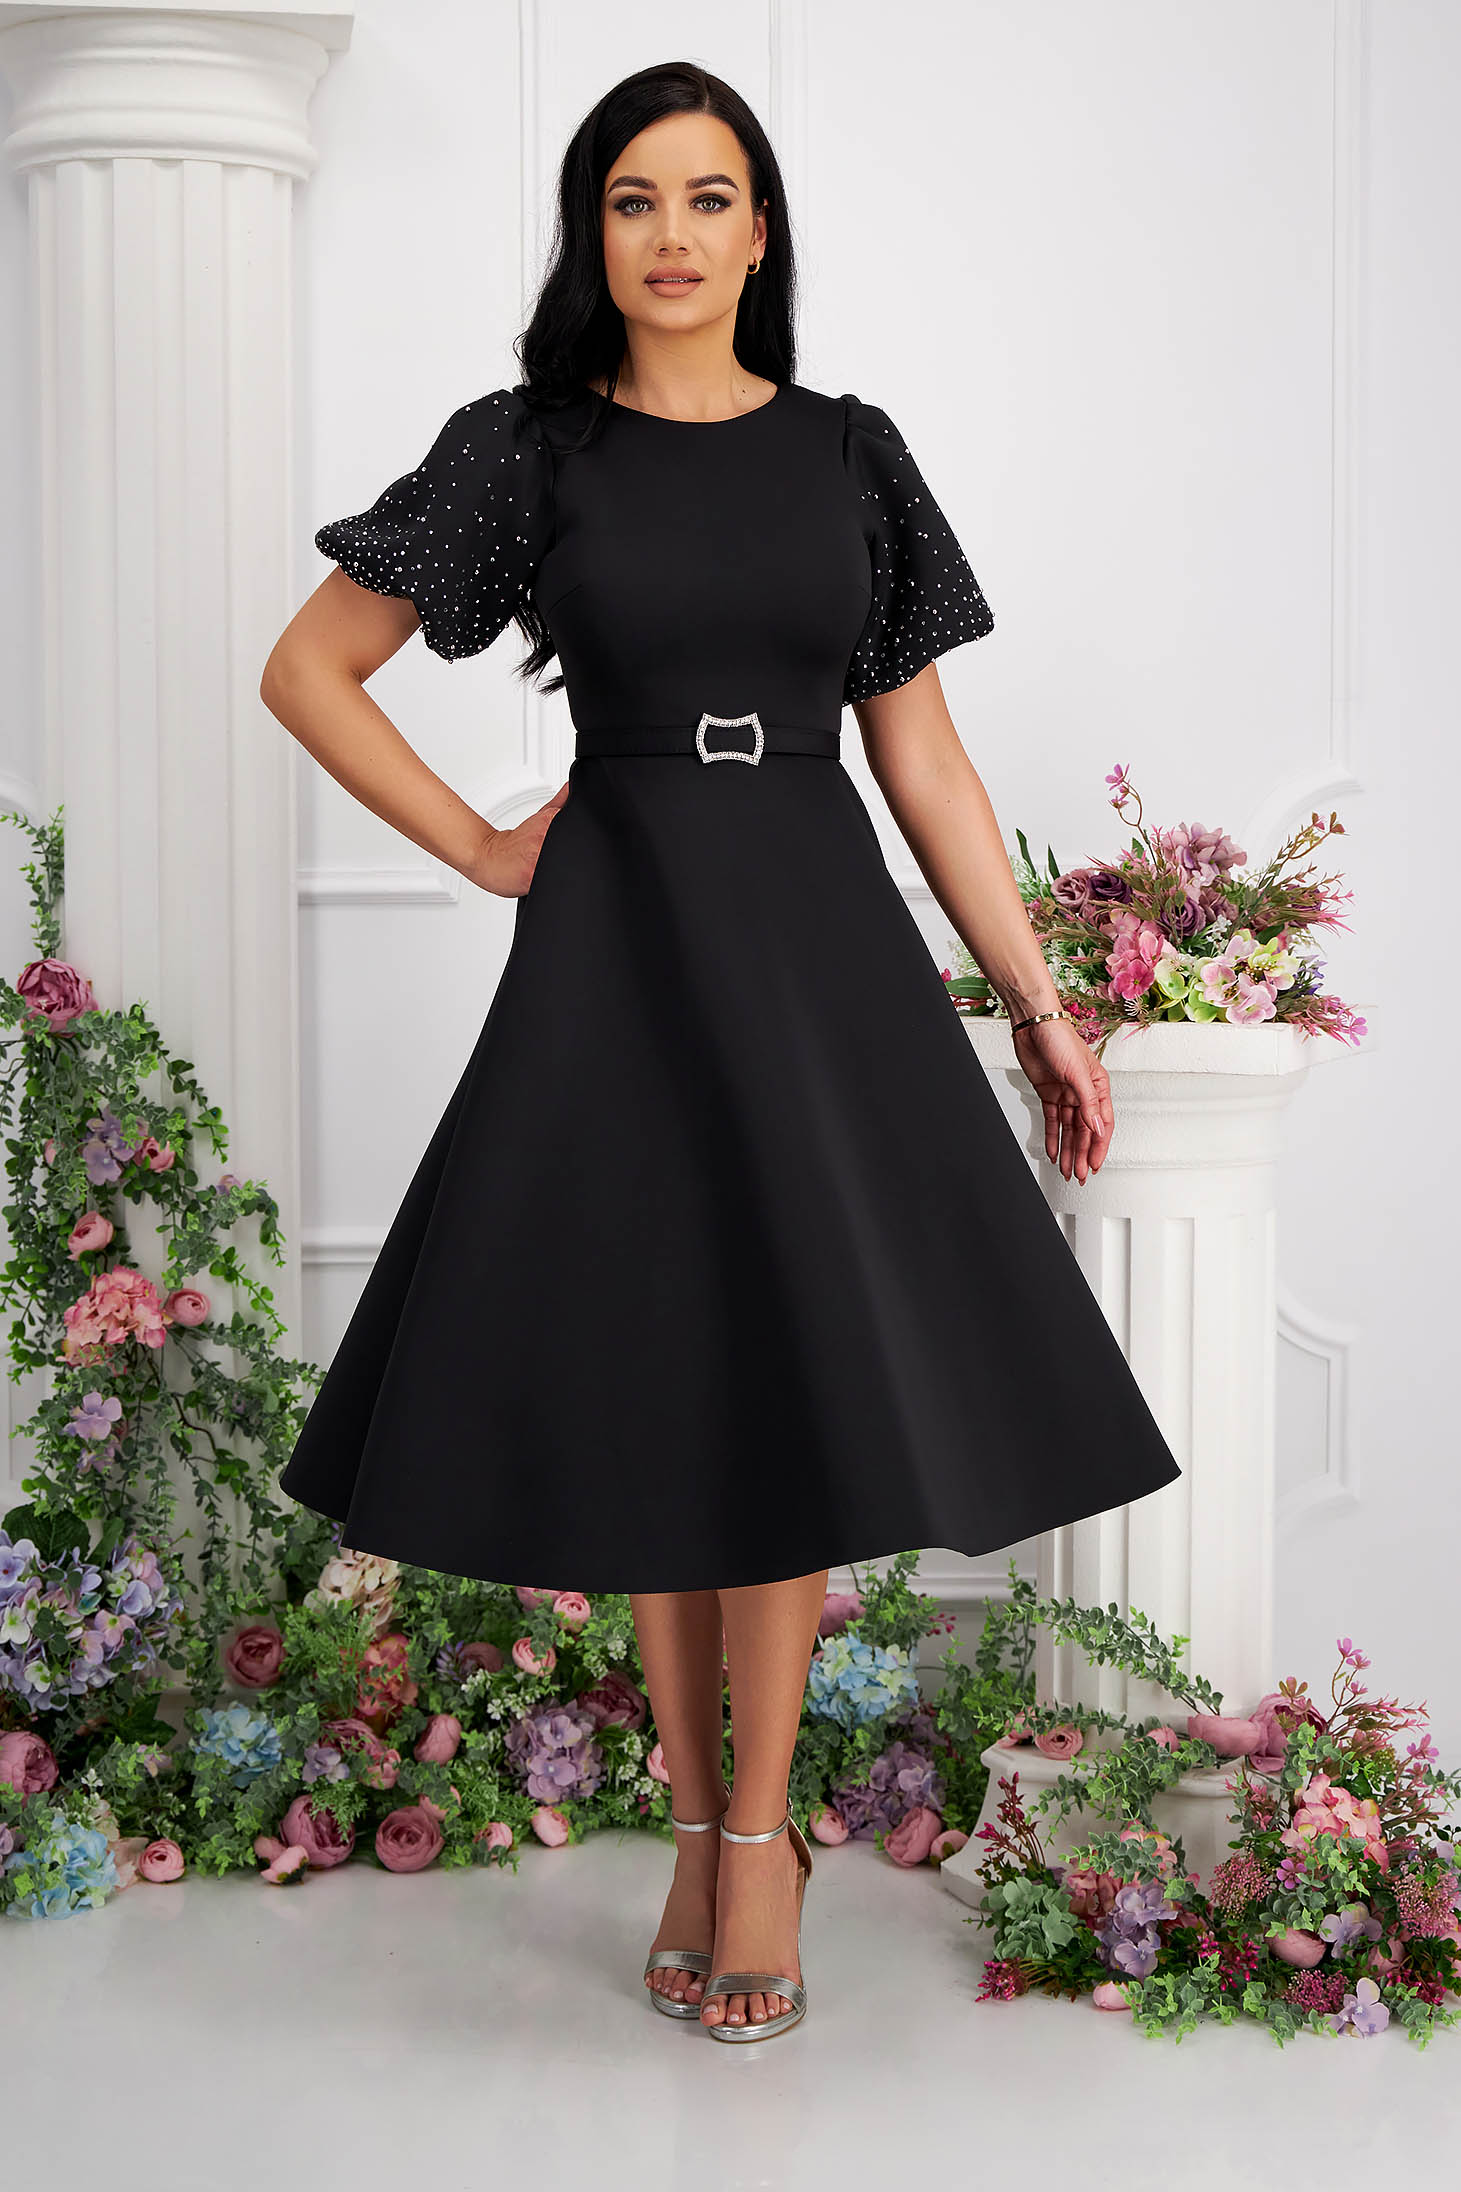 Black dress midi cloche lateral pockets with puffed sleeves strass